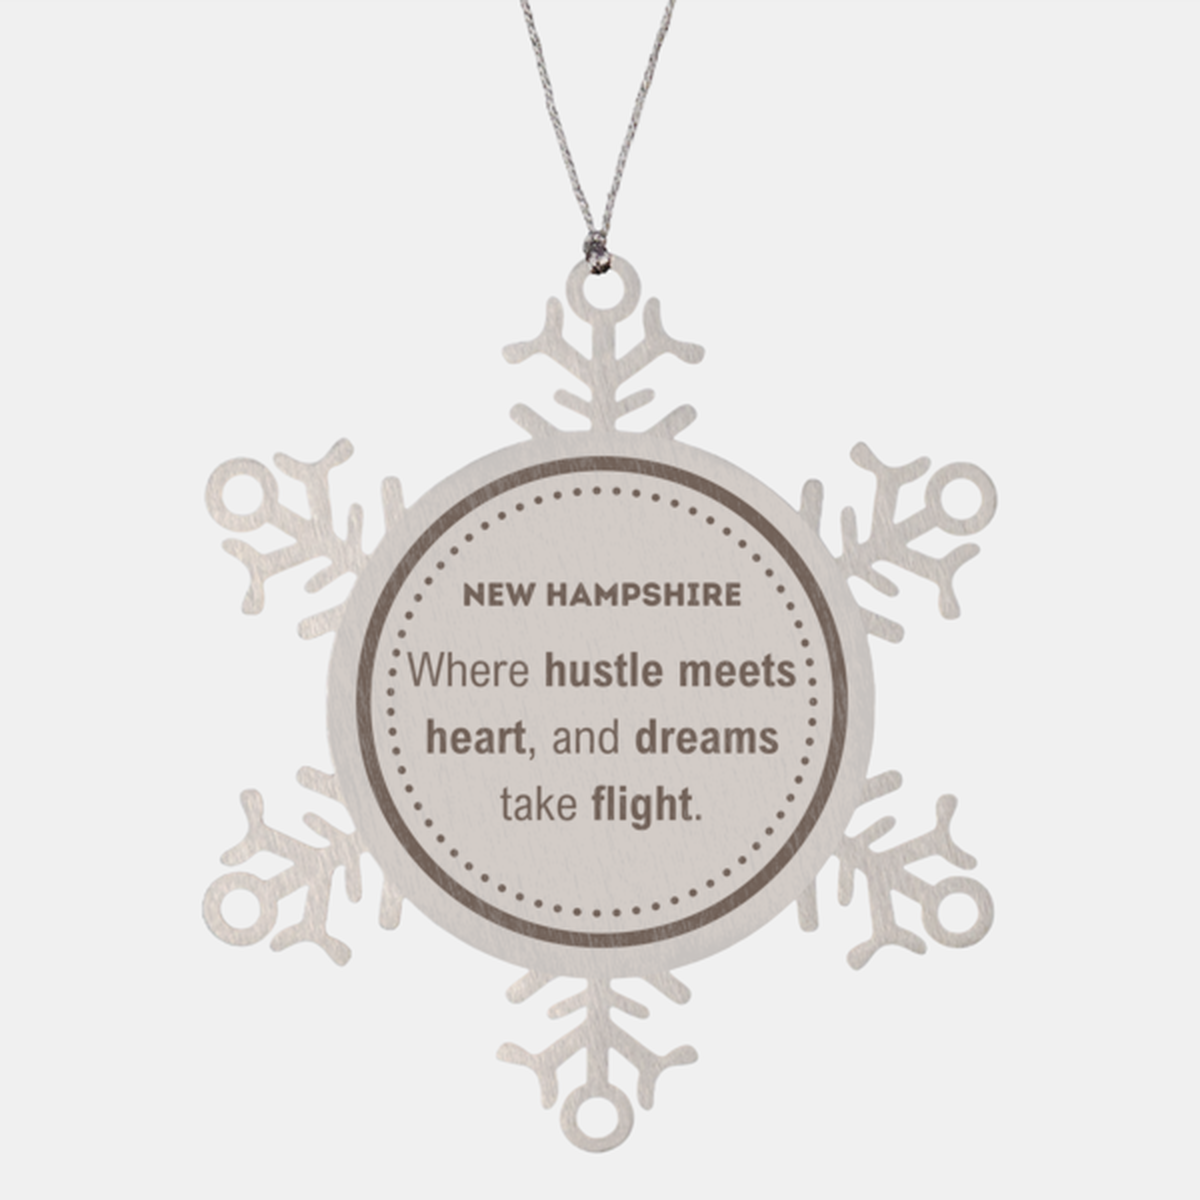 New Hampshire: Where hustle meets heart, and dreams take flight, New Hampshire Ornament Gifts, Proud New Hampshire Christmas New Hampshire Snowflake Ornament, New Hampshire State People, Men, Women, Friends